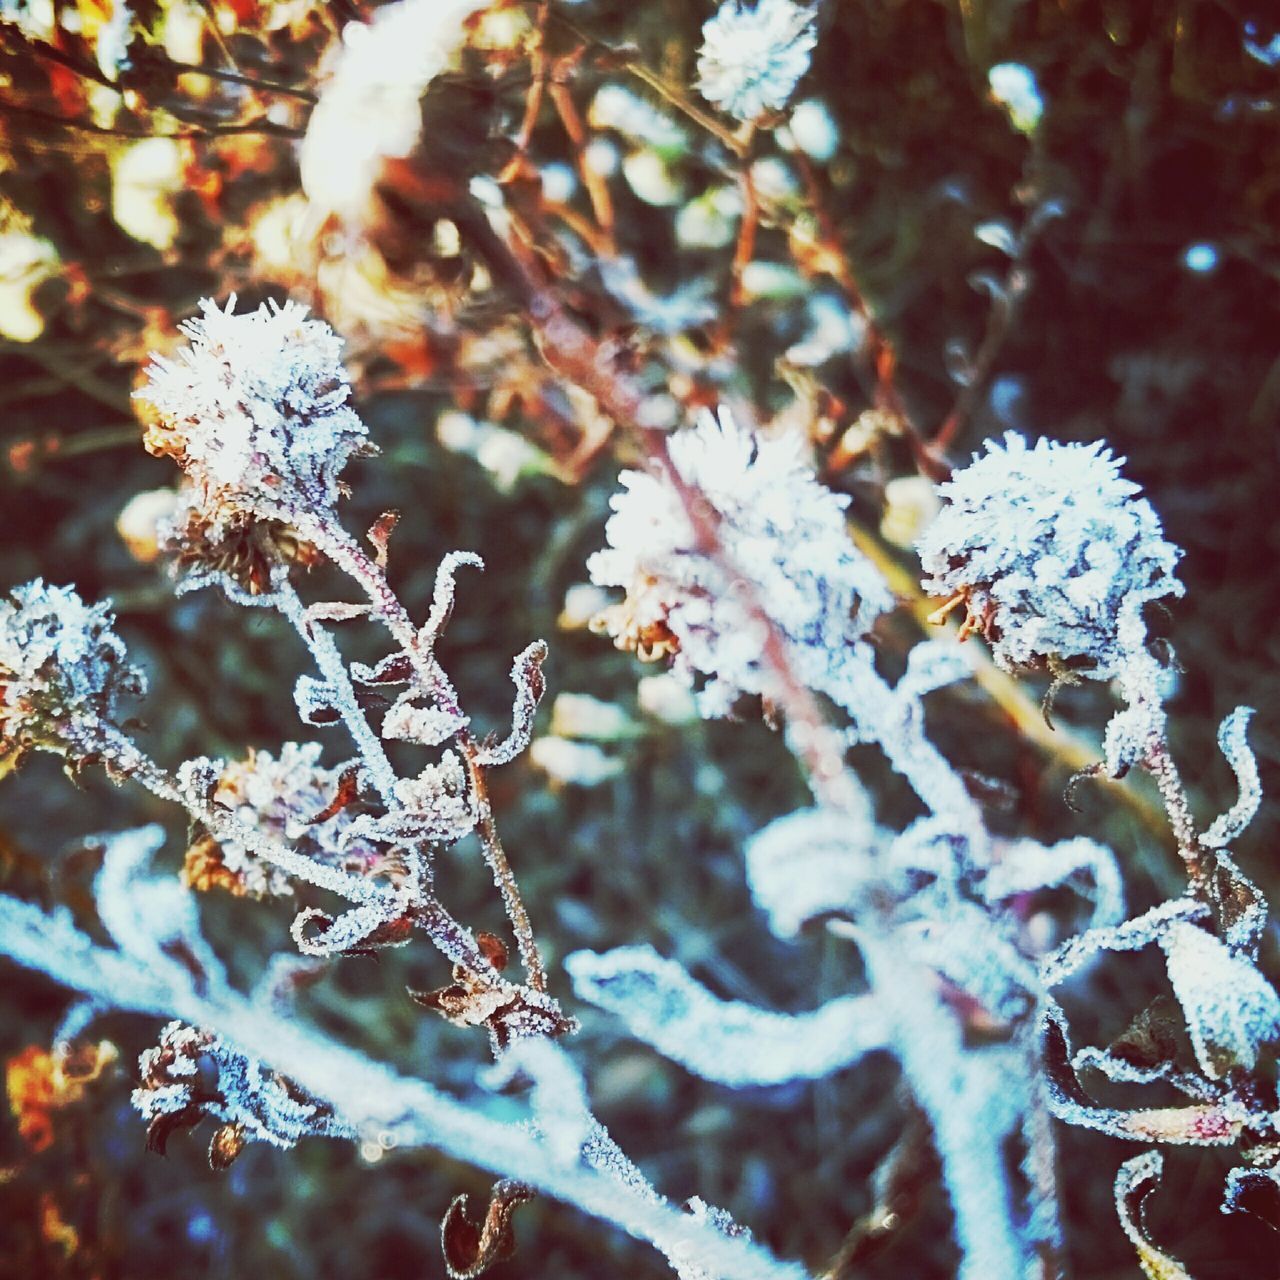 flower, branch, tree, focus on foreground, nature, growth, season, beauty in nature, fragility, close-up, snow, winter, plant, day, freshness, outdoors, selective focus, cold temperature, no people, white color